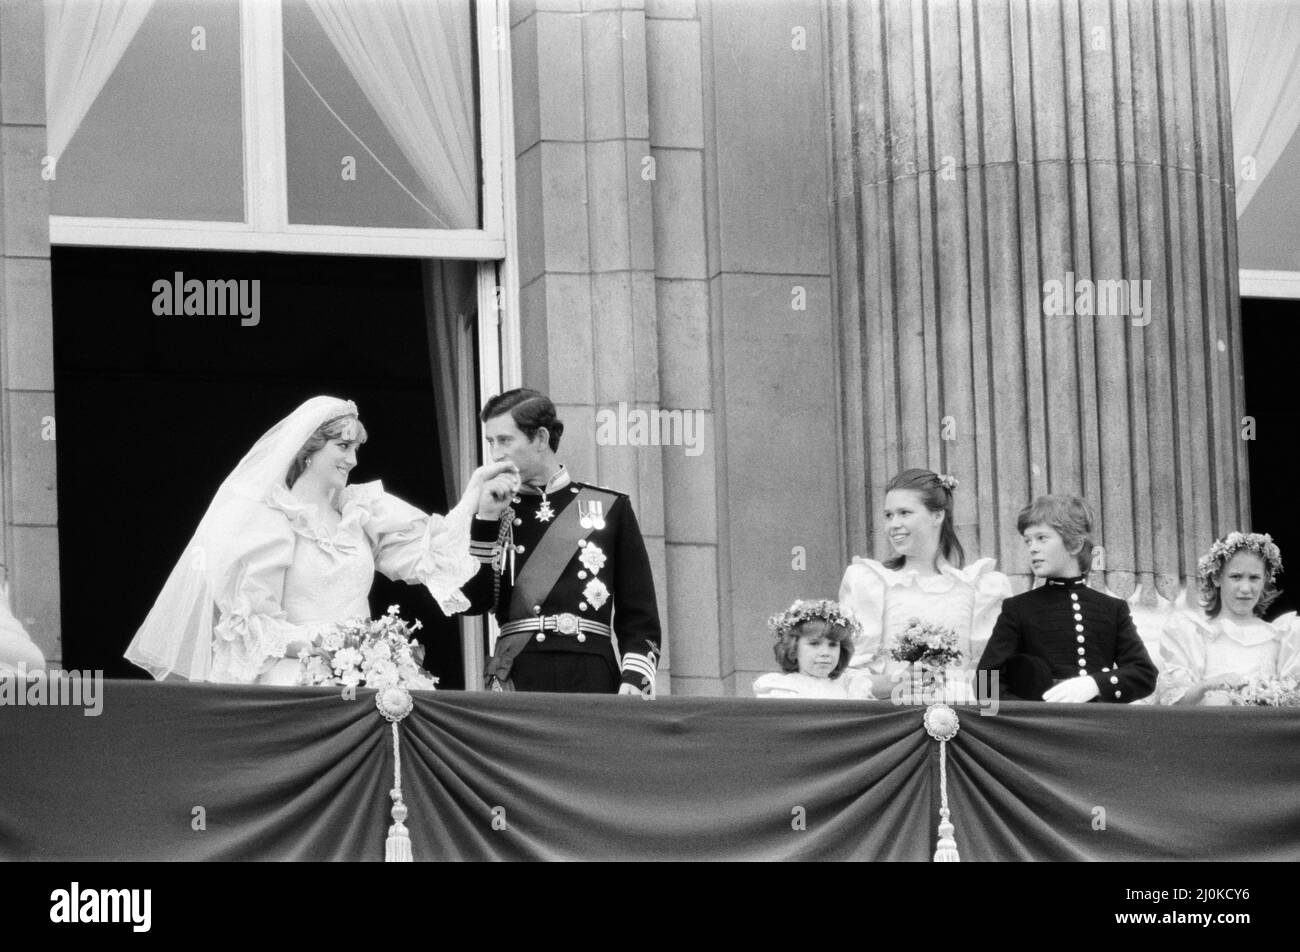 Prince Charles kissed the hand of his bride, Lady Diana Spencer. Picture taken of the happy couple on the balcony at Buckingham Palace after the wedding ceremony.  Picture taken 29th July 1981. Stock Photo